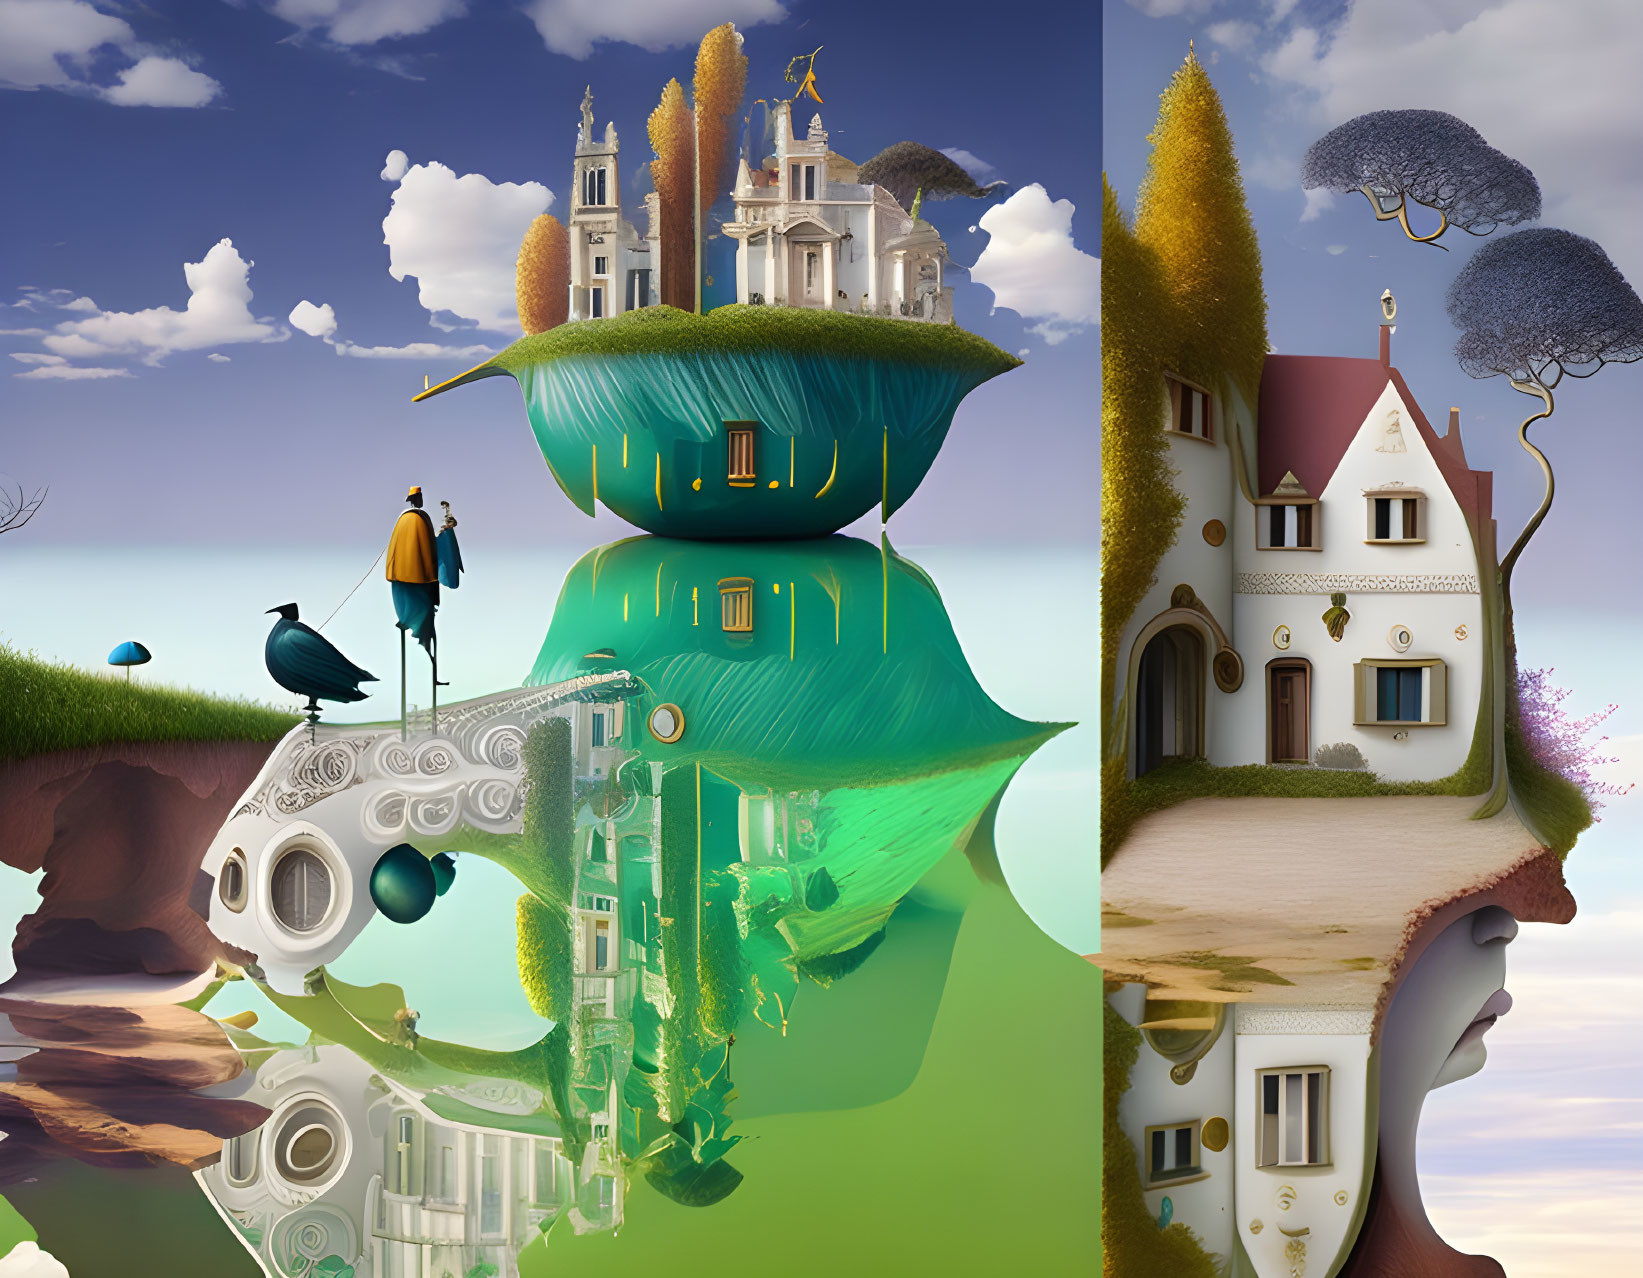 Surreal landscape featuring castle on giant leaf, crow, penguin, whimsical house, and